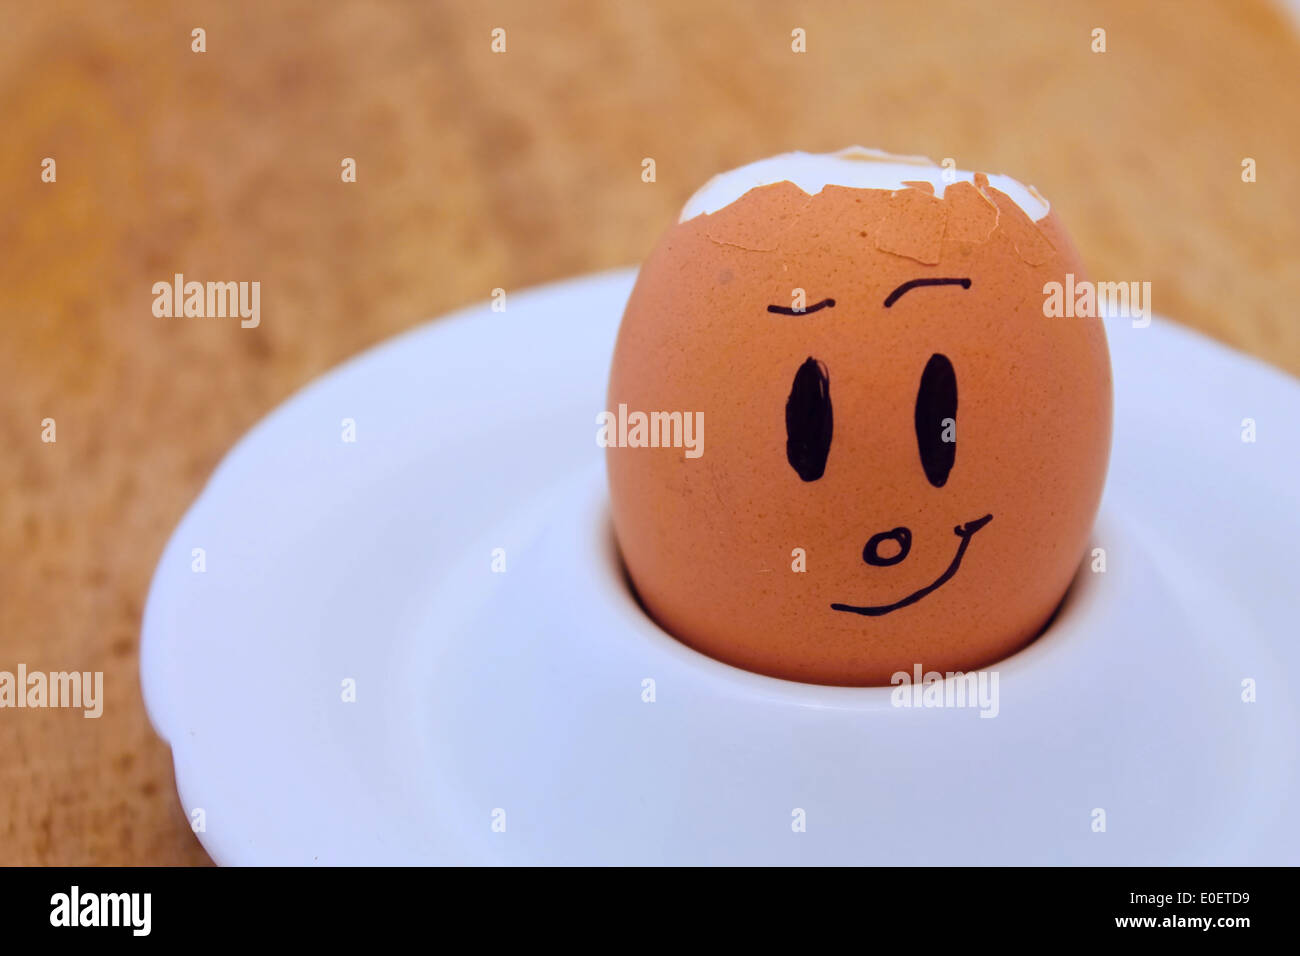 Egg with broken shell and drawn face Stock Photo